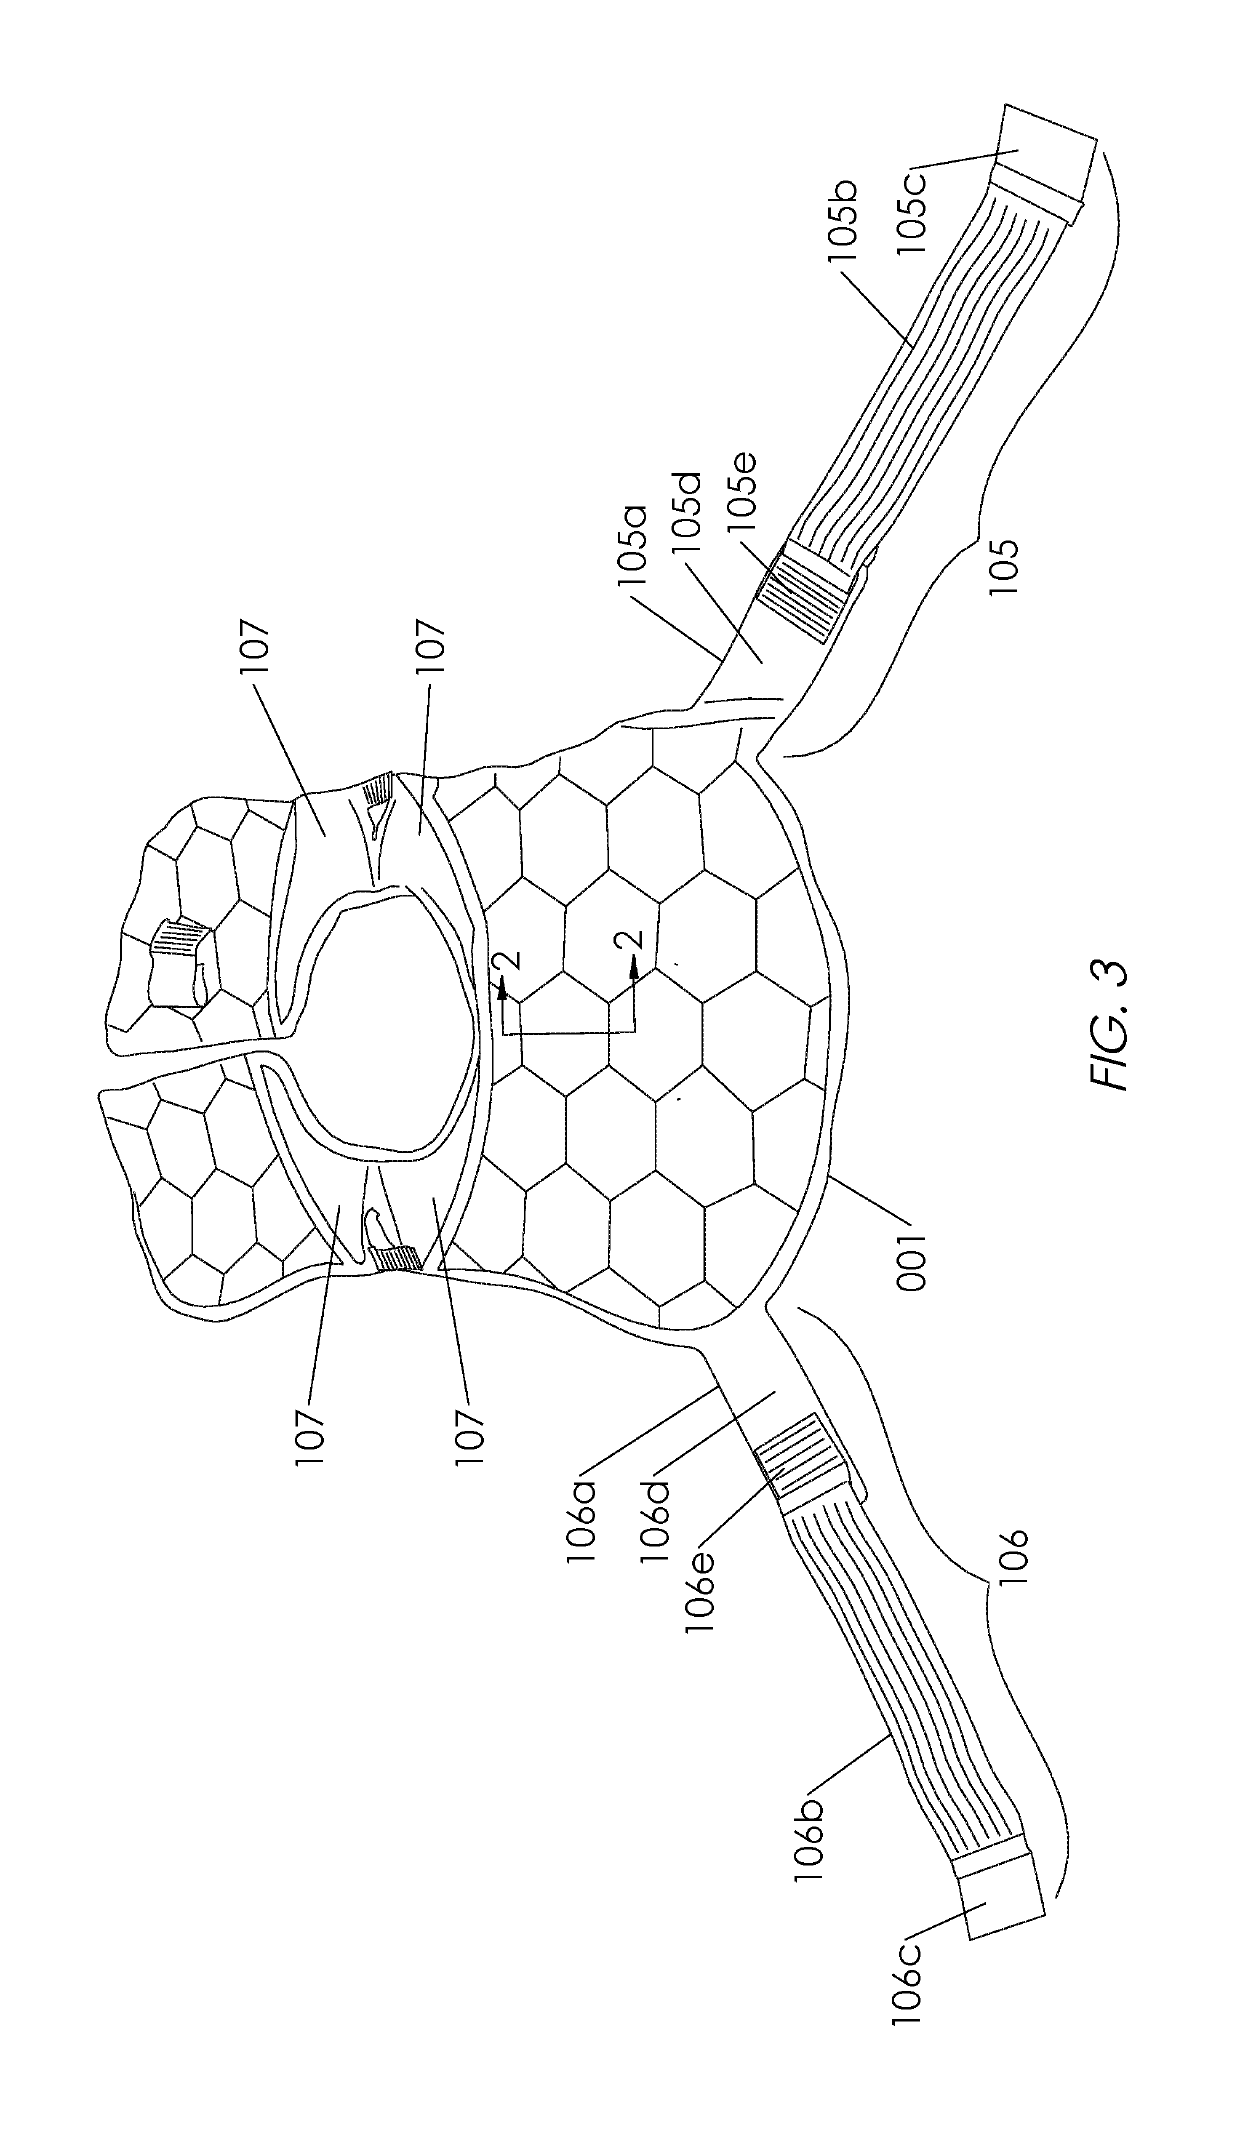 Temperature controlling vest and method of manufacture and use for relieving or controlling menopause and post-menopause symptoms